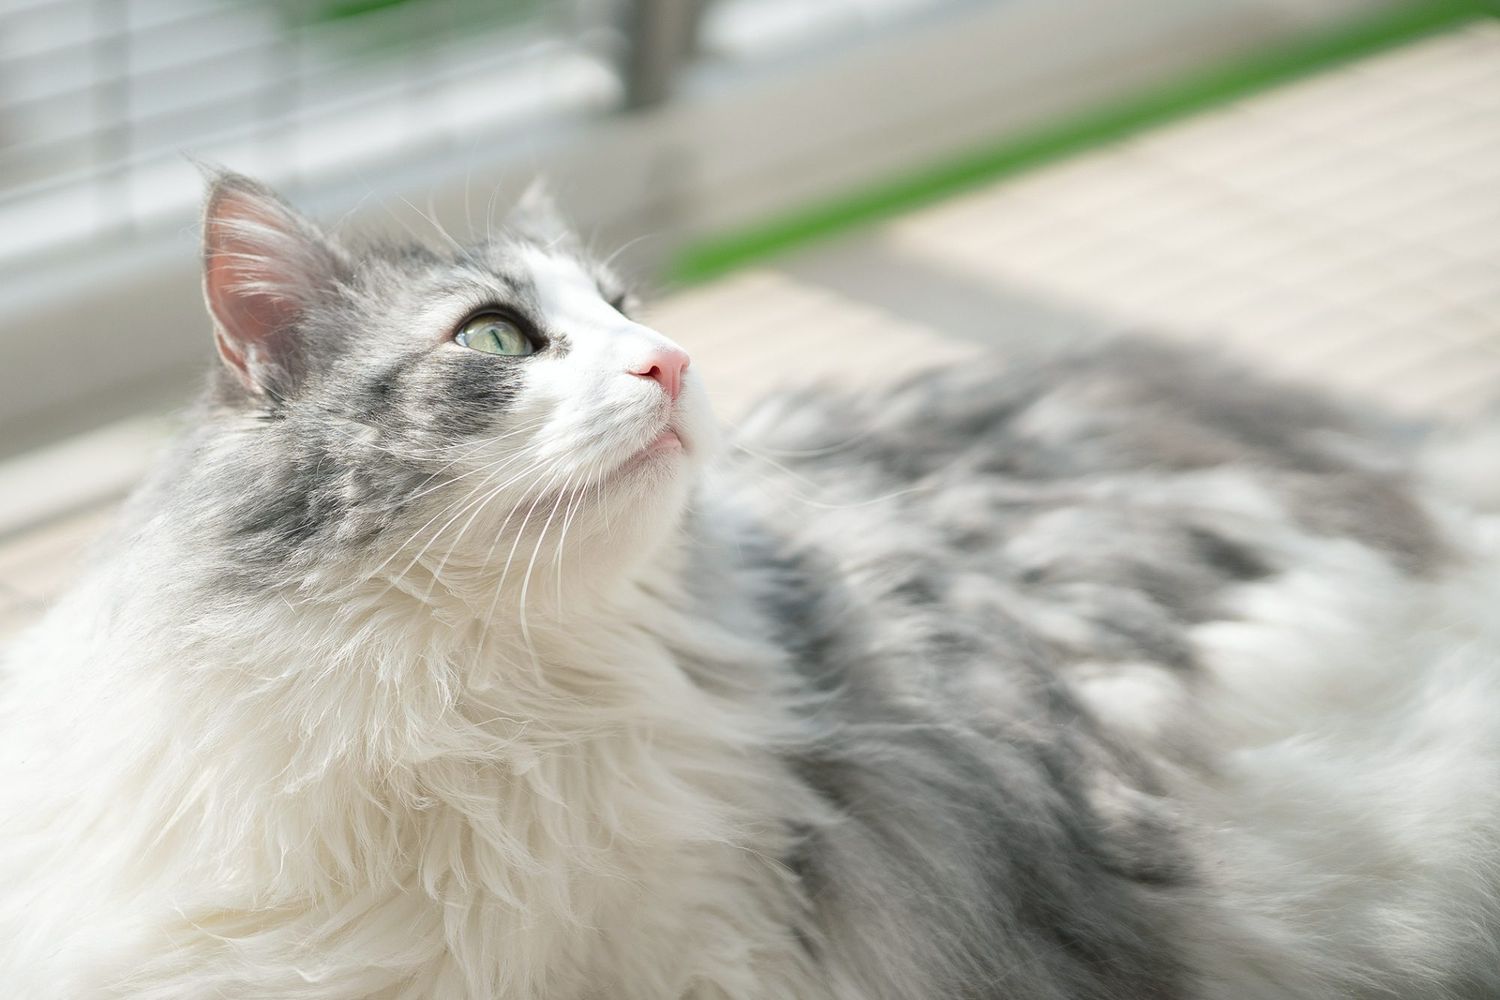 a grey and white Norwegian Forest Cat soaking up the sun in front of a window